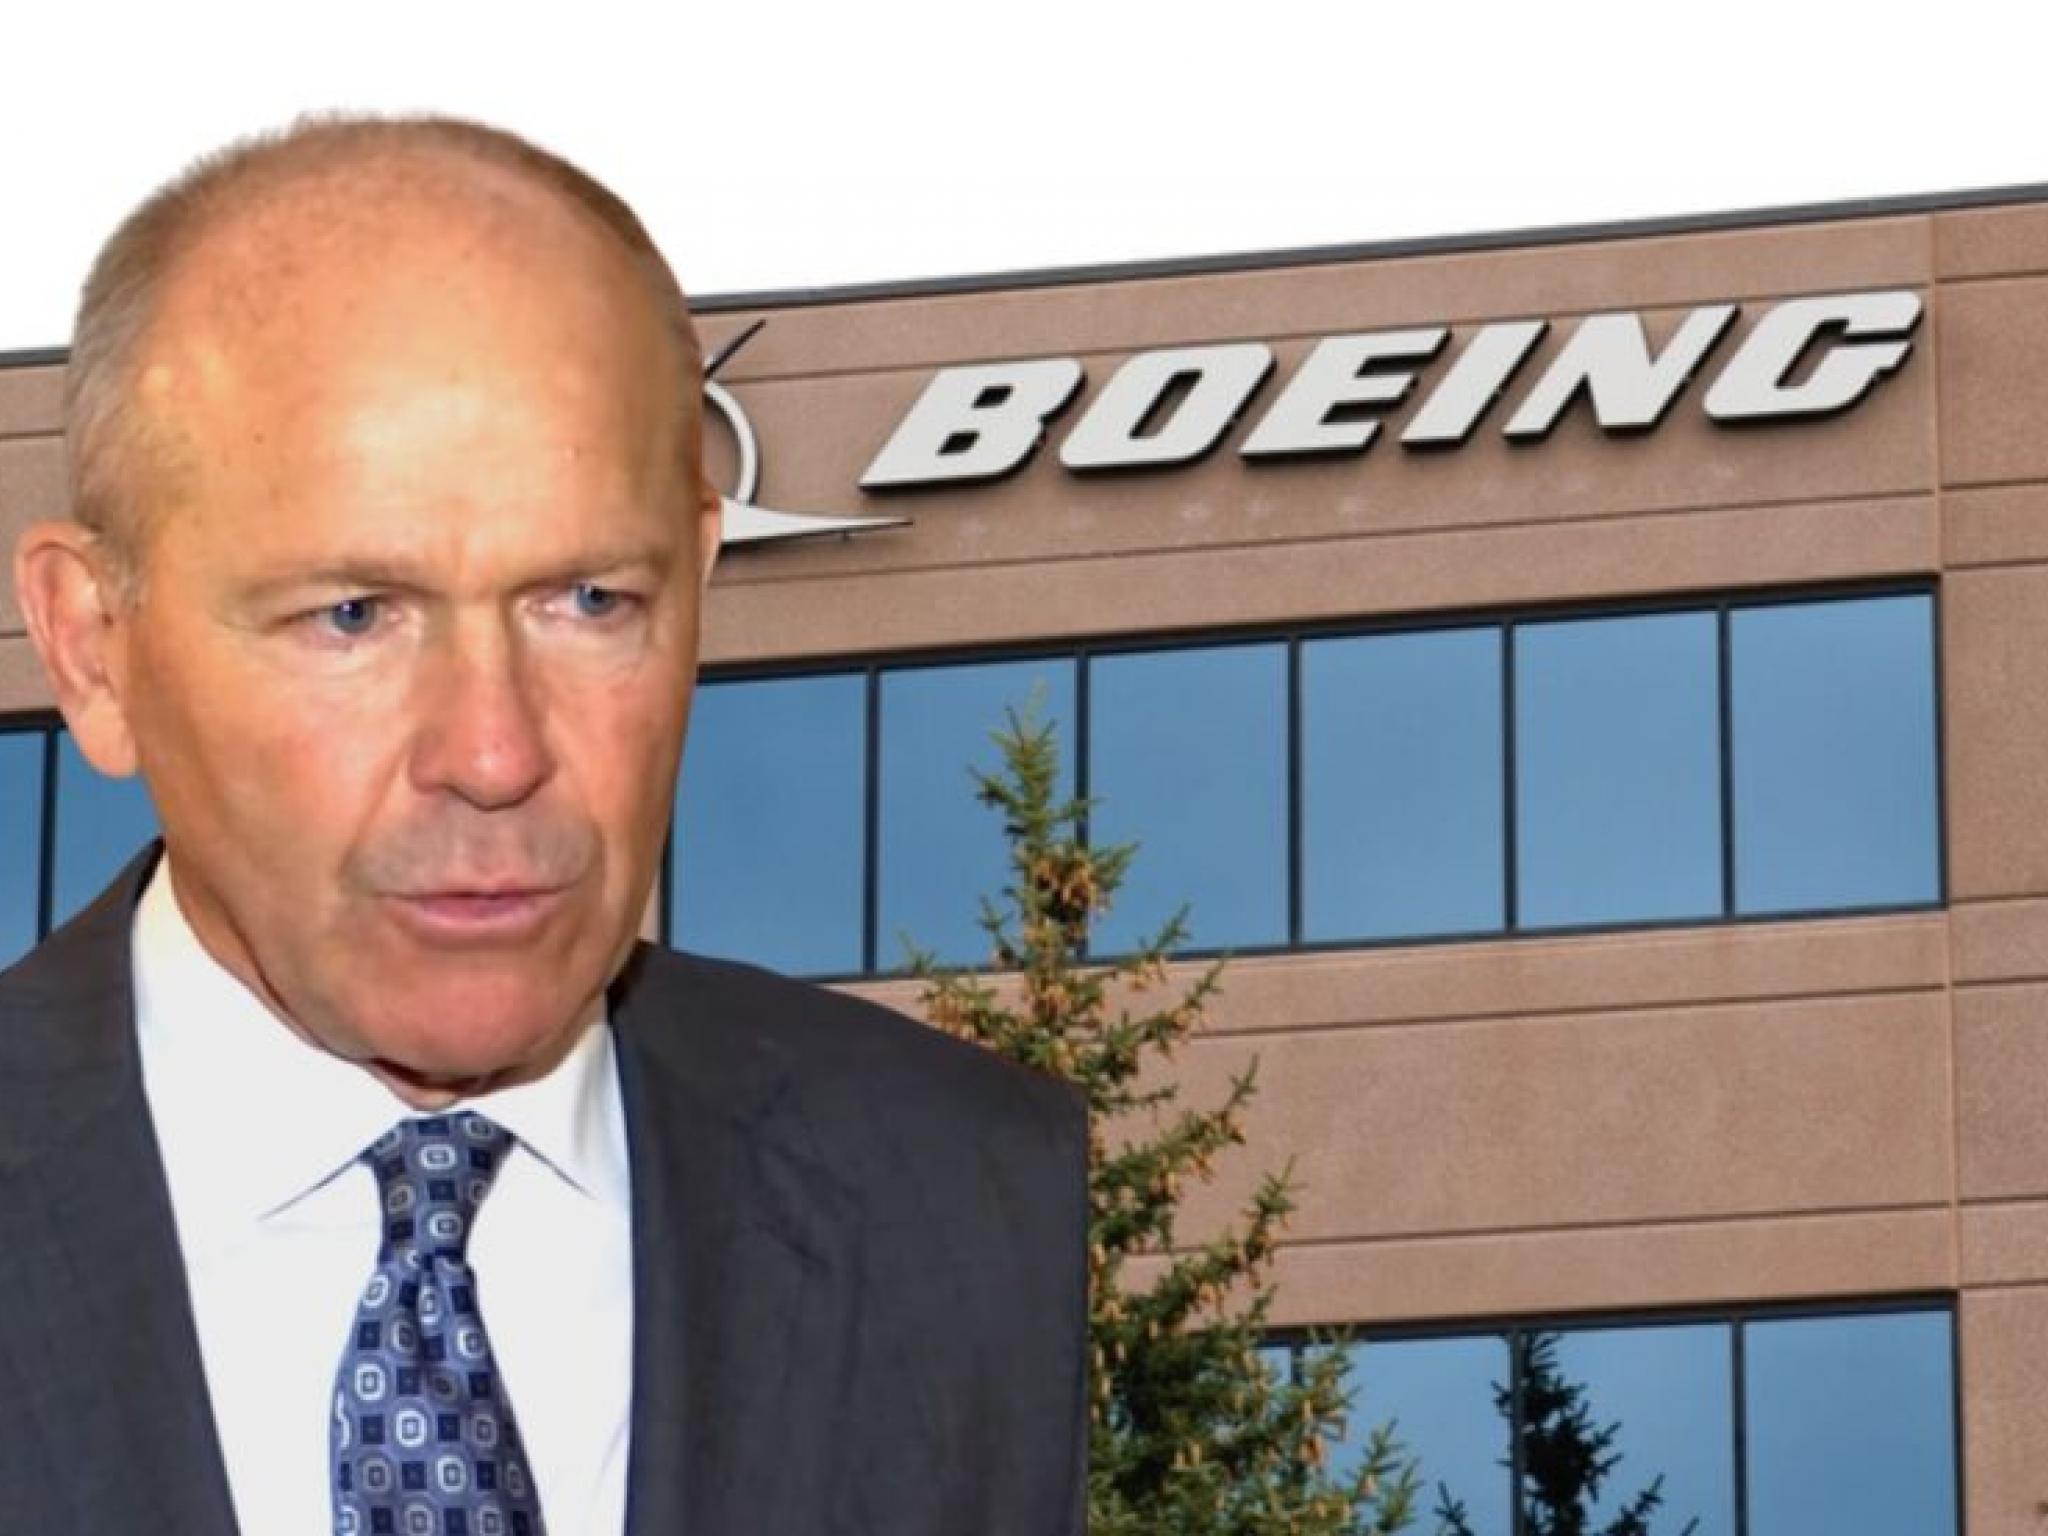  will-boeings-outgoing-ceo-dave-calhoun-retain-his-board-status-shareholders-to-vote-today 